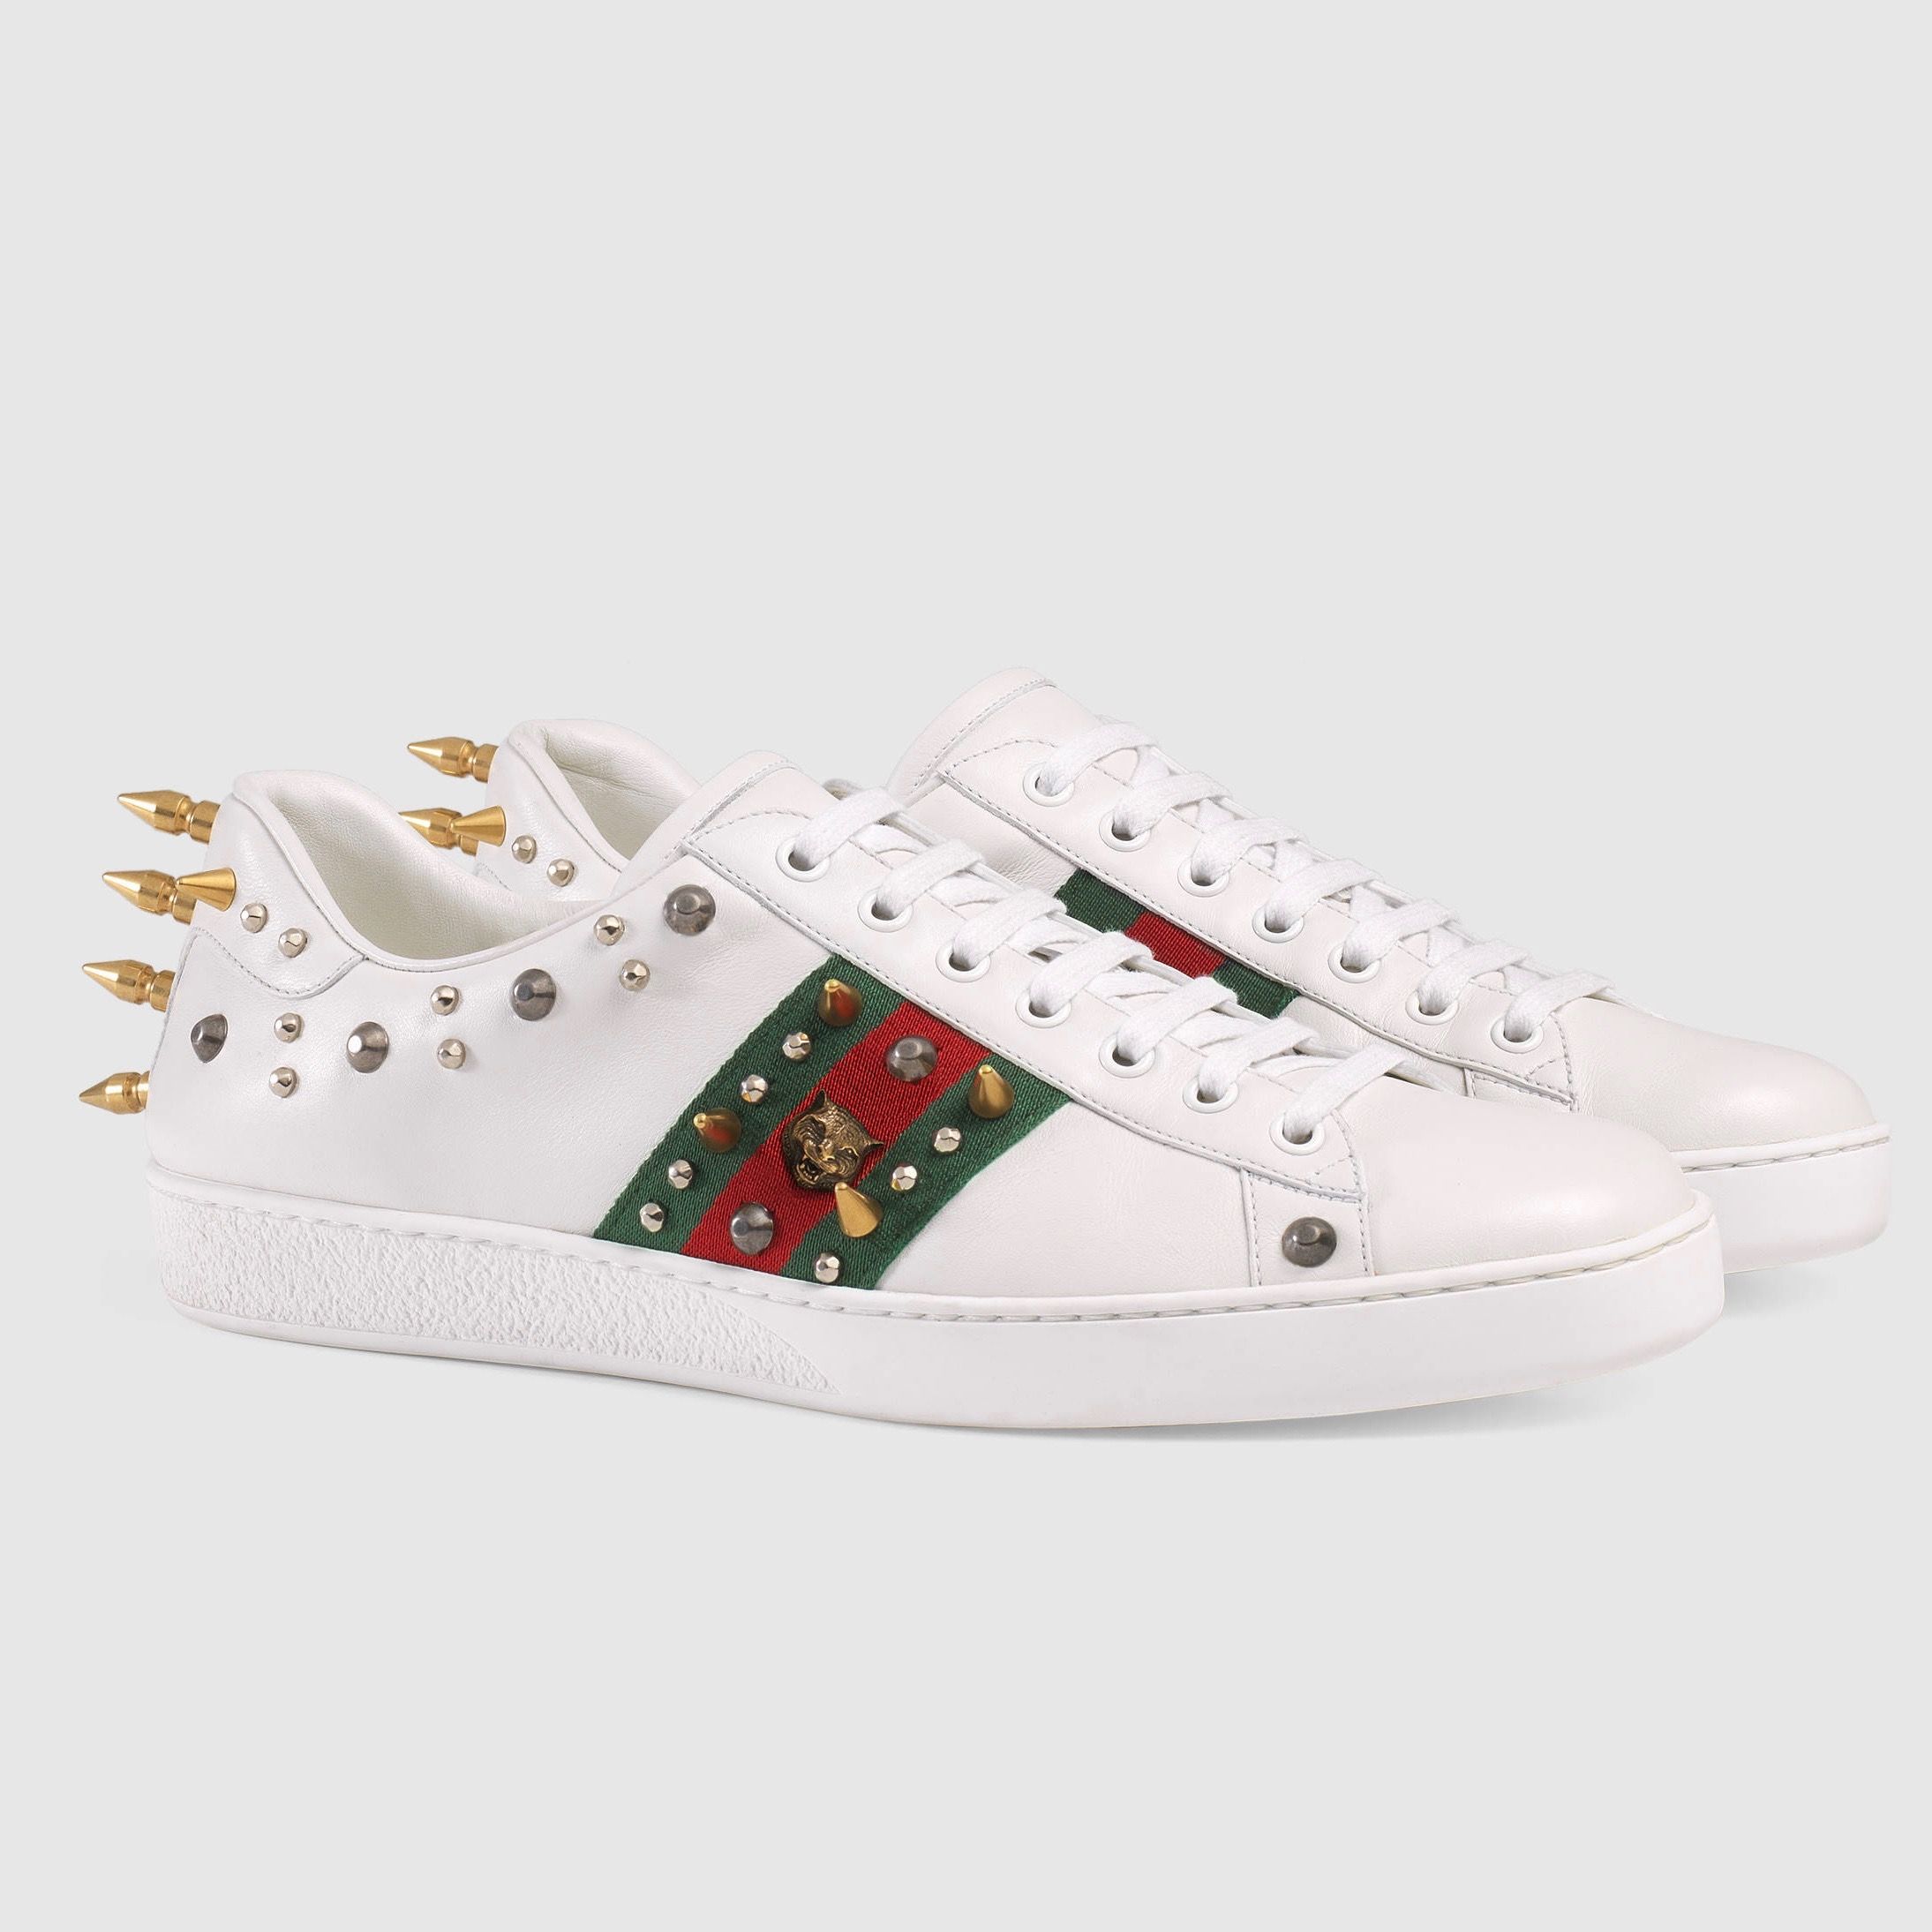 Gucci Ace studded leather low-top sneakers